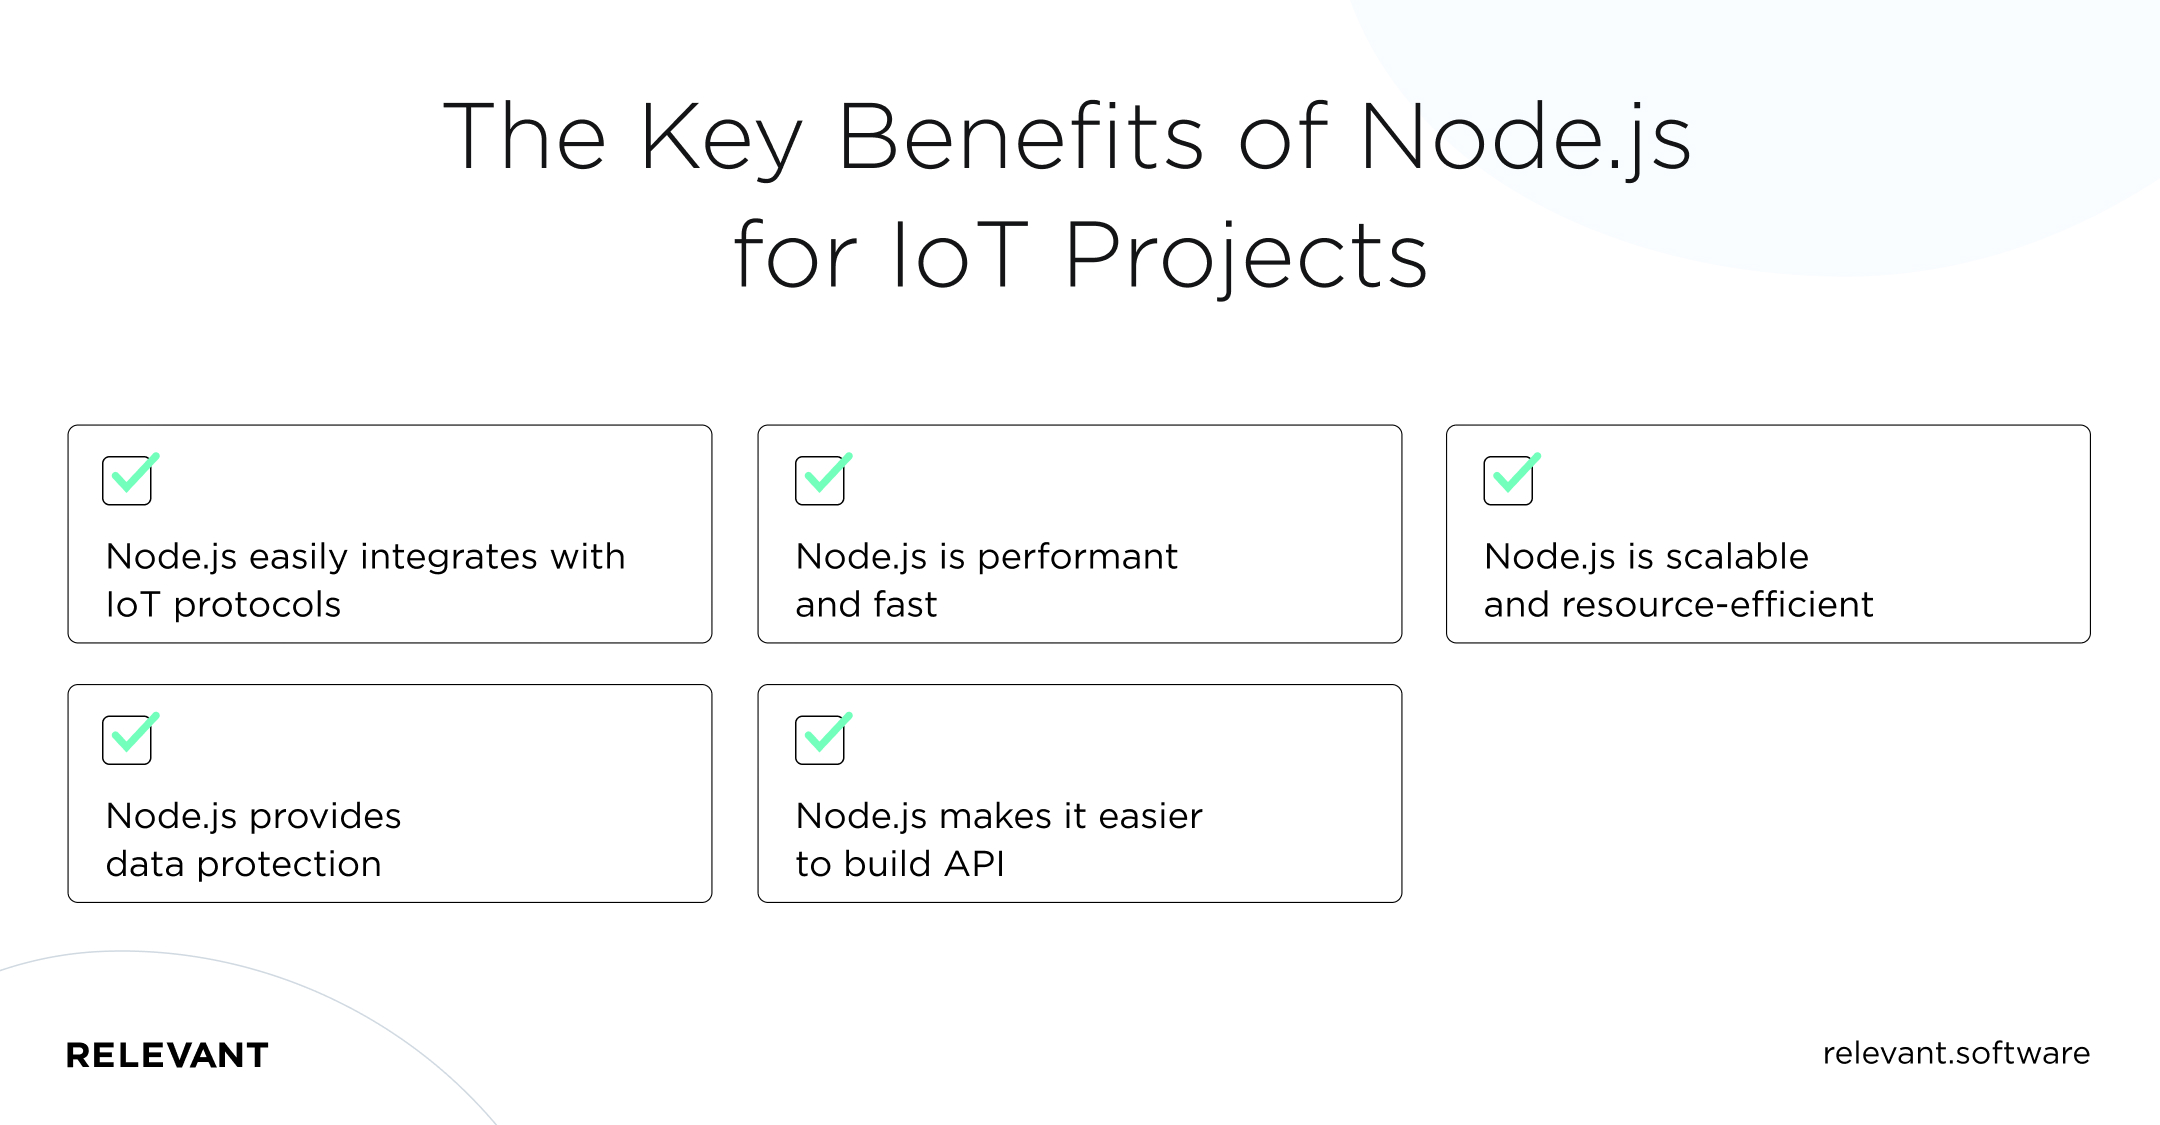 The Key Benefits of Node.js for IoT Projects